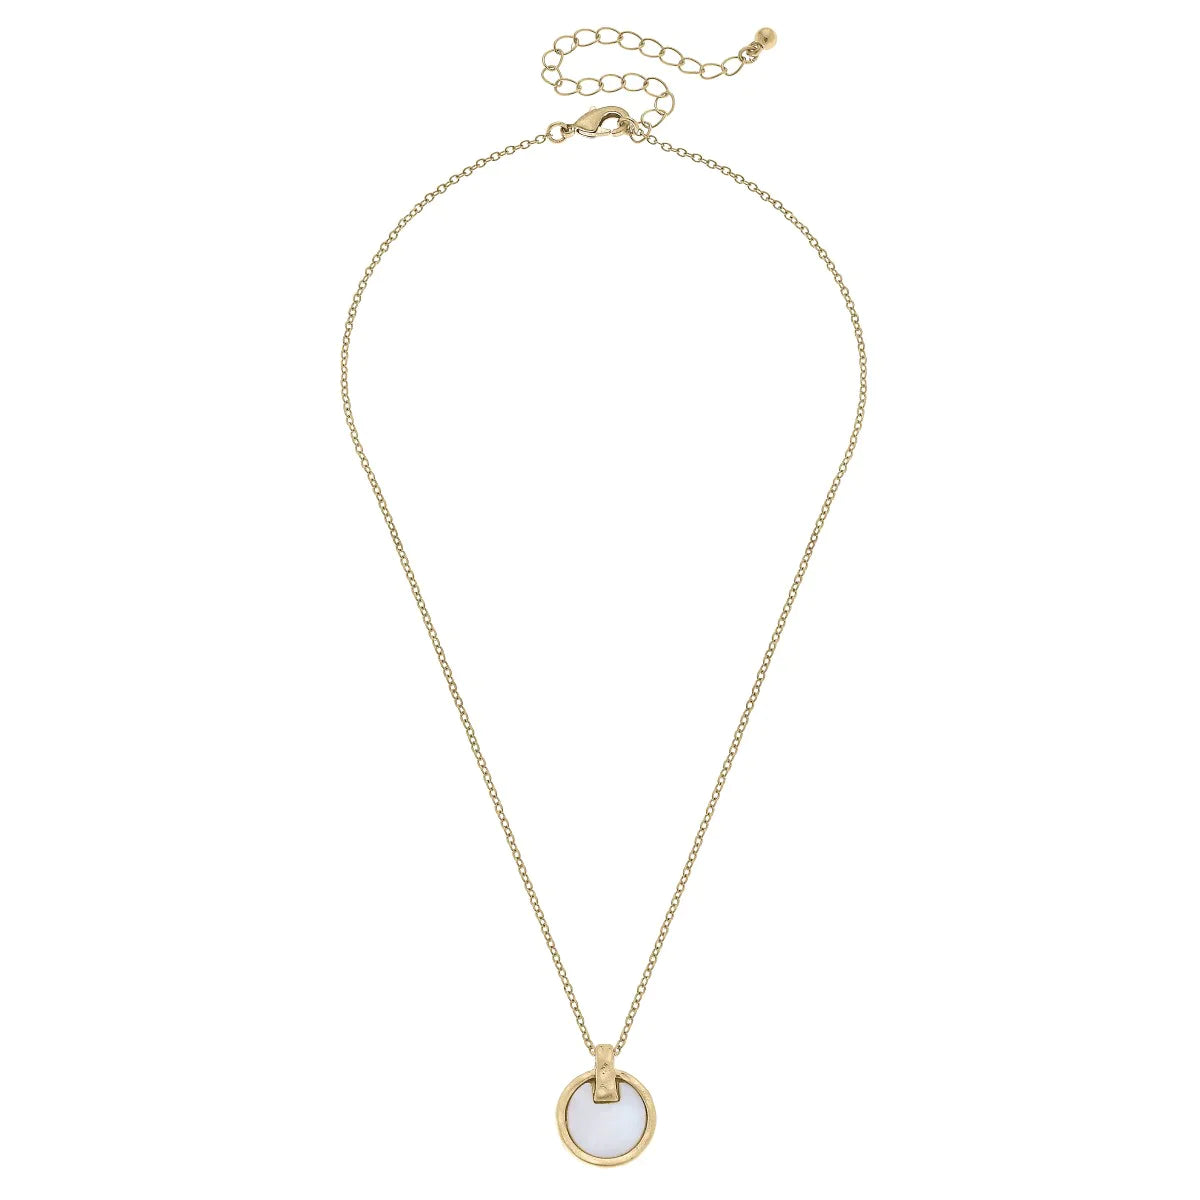 Mariana Pearl Delicate Disc Necklace in Mother of Pearl